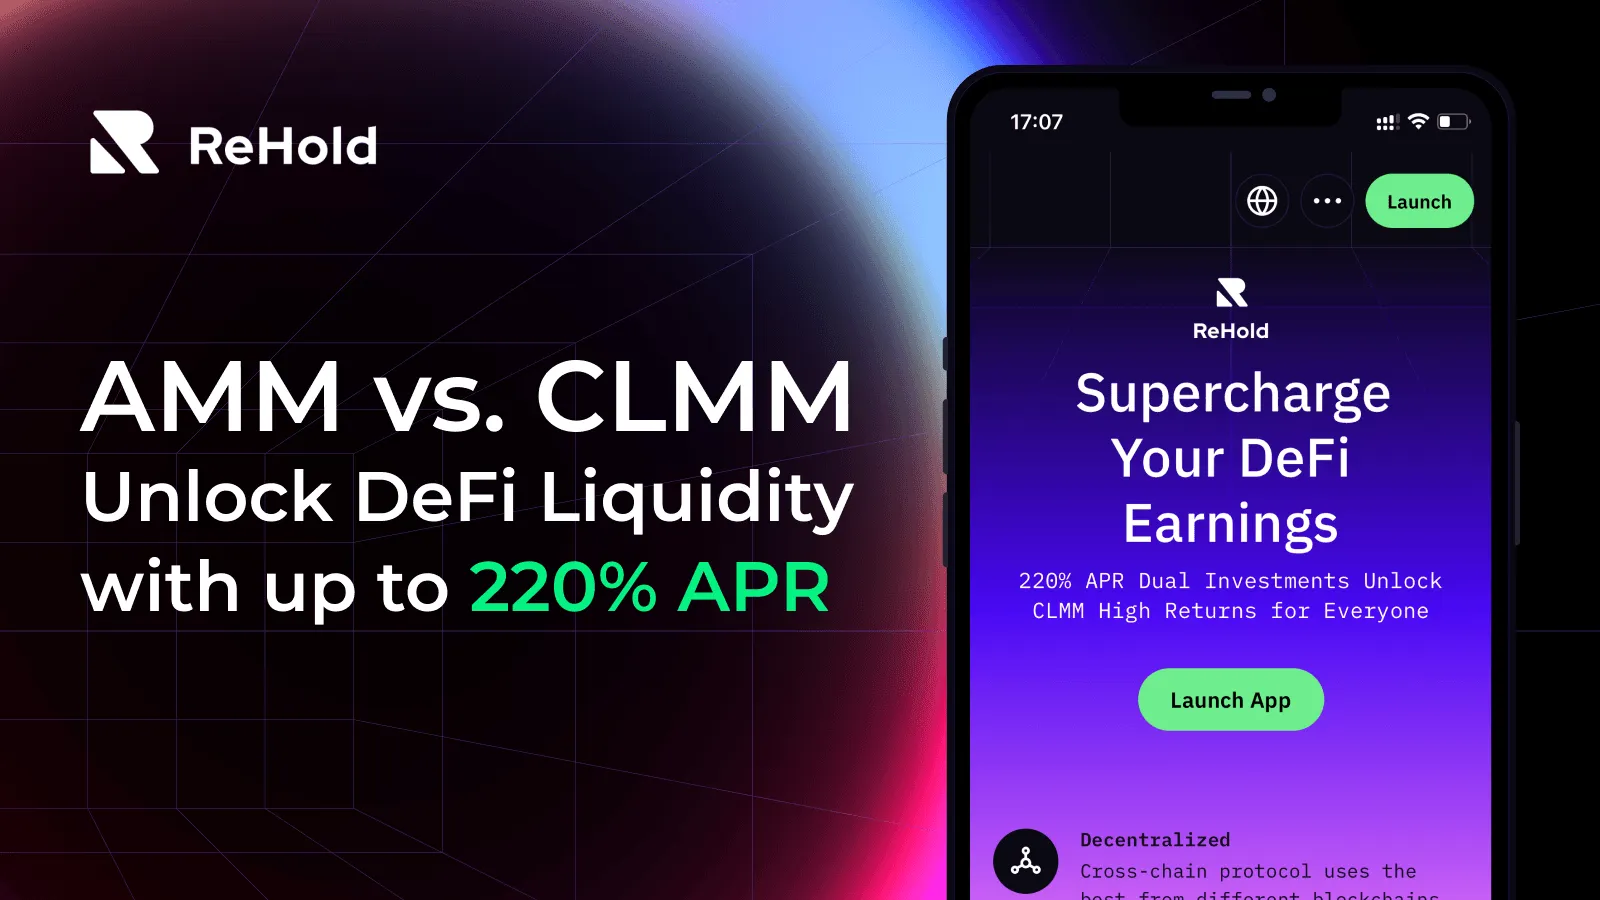 What is AMM (Automated Market Maker) and what is the difference with CLMM (Concentrated Liquidity Market Makers)